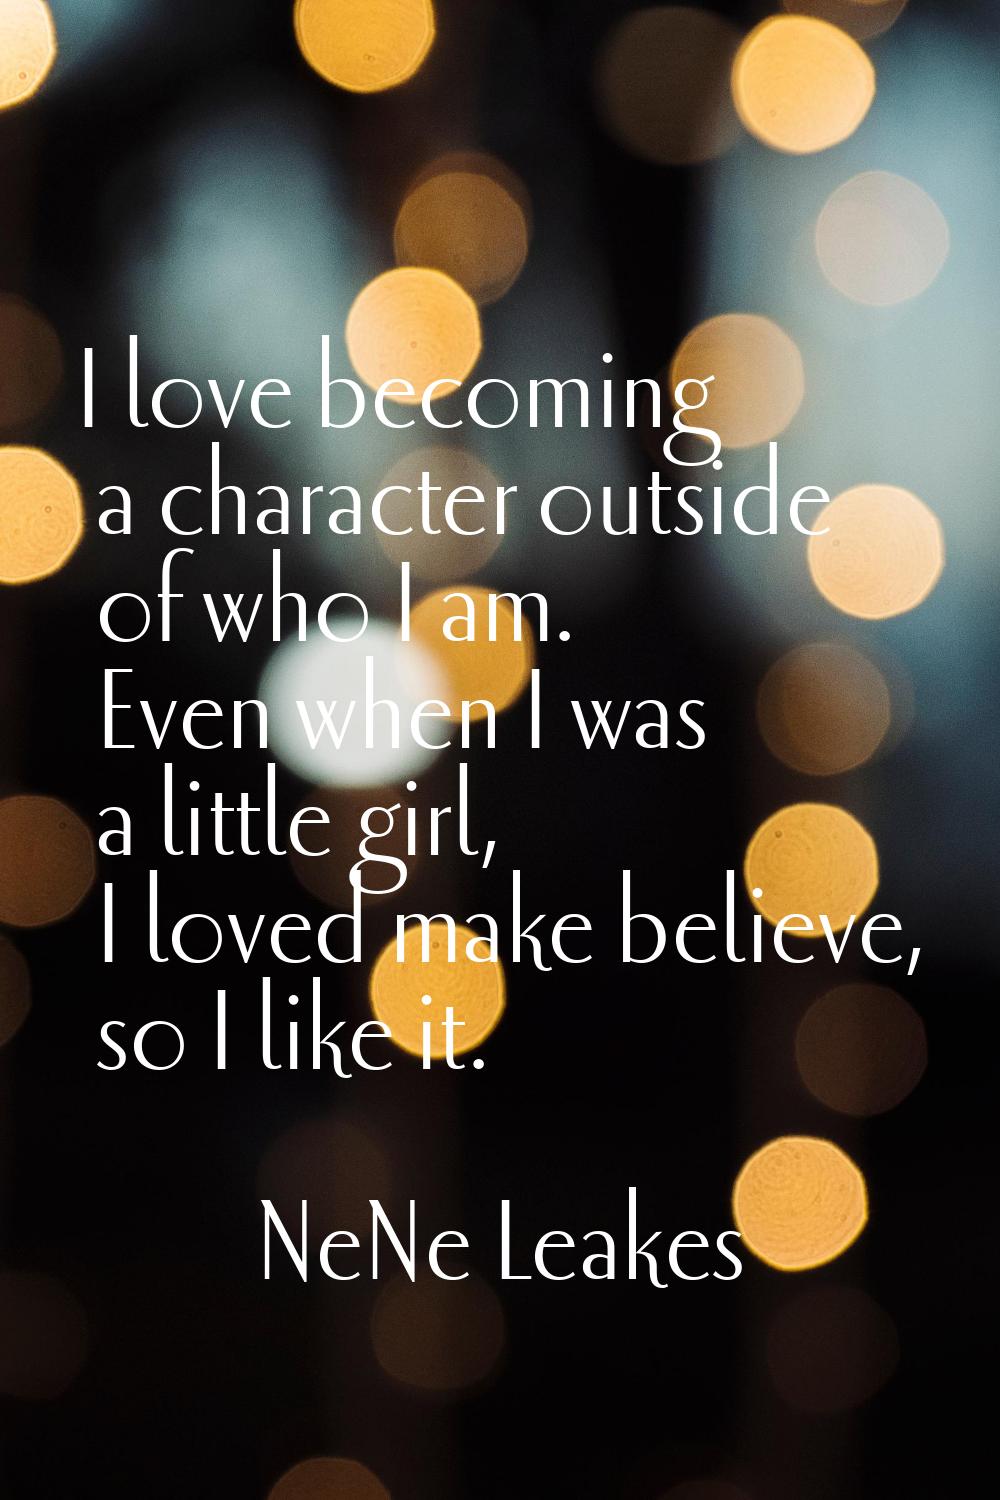 I love becoming a character outside of who I am. Even when I was a little girl, I loved make believ